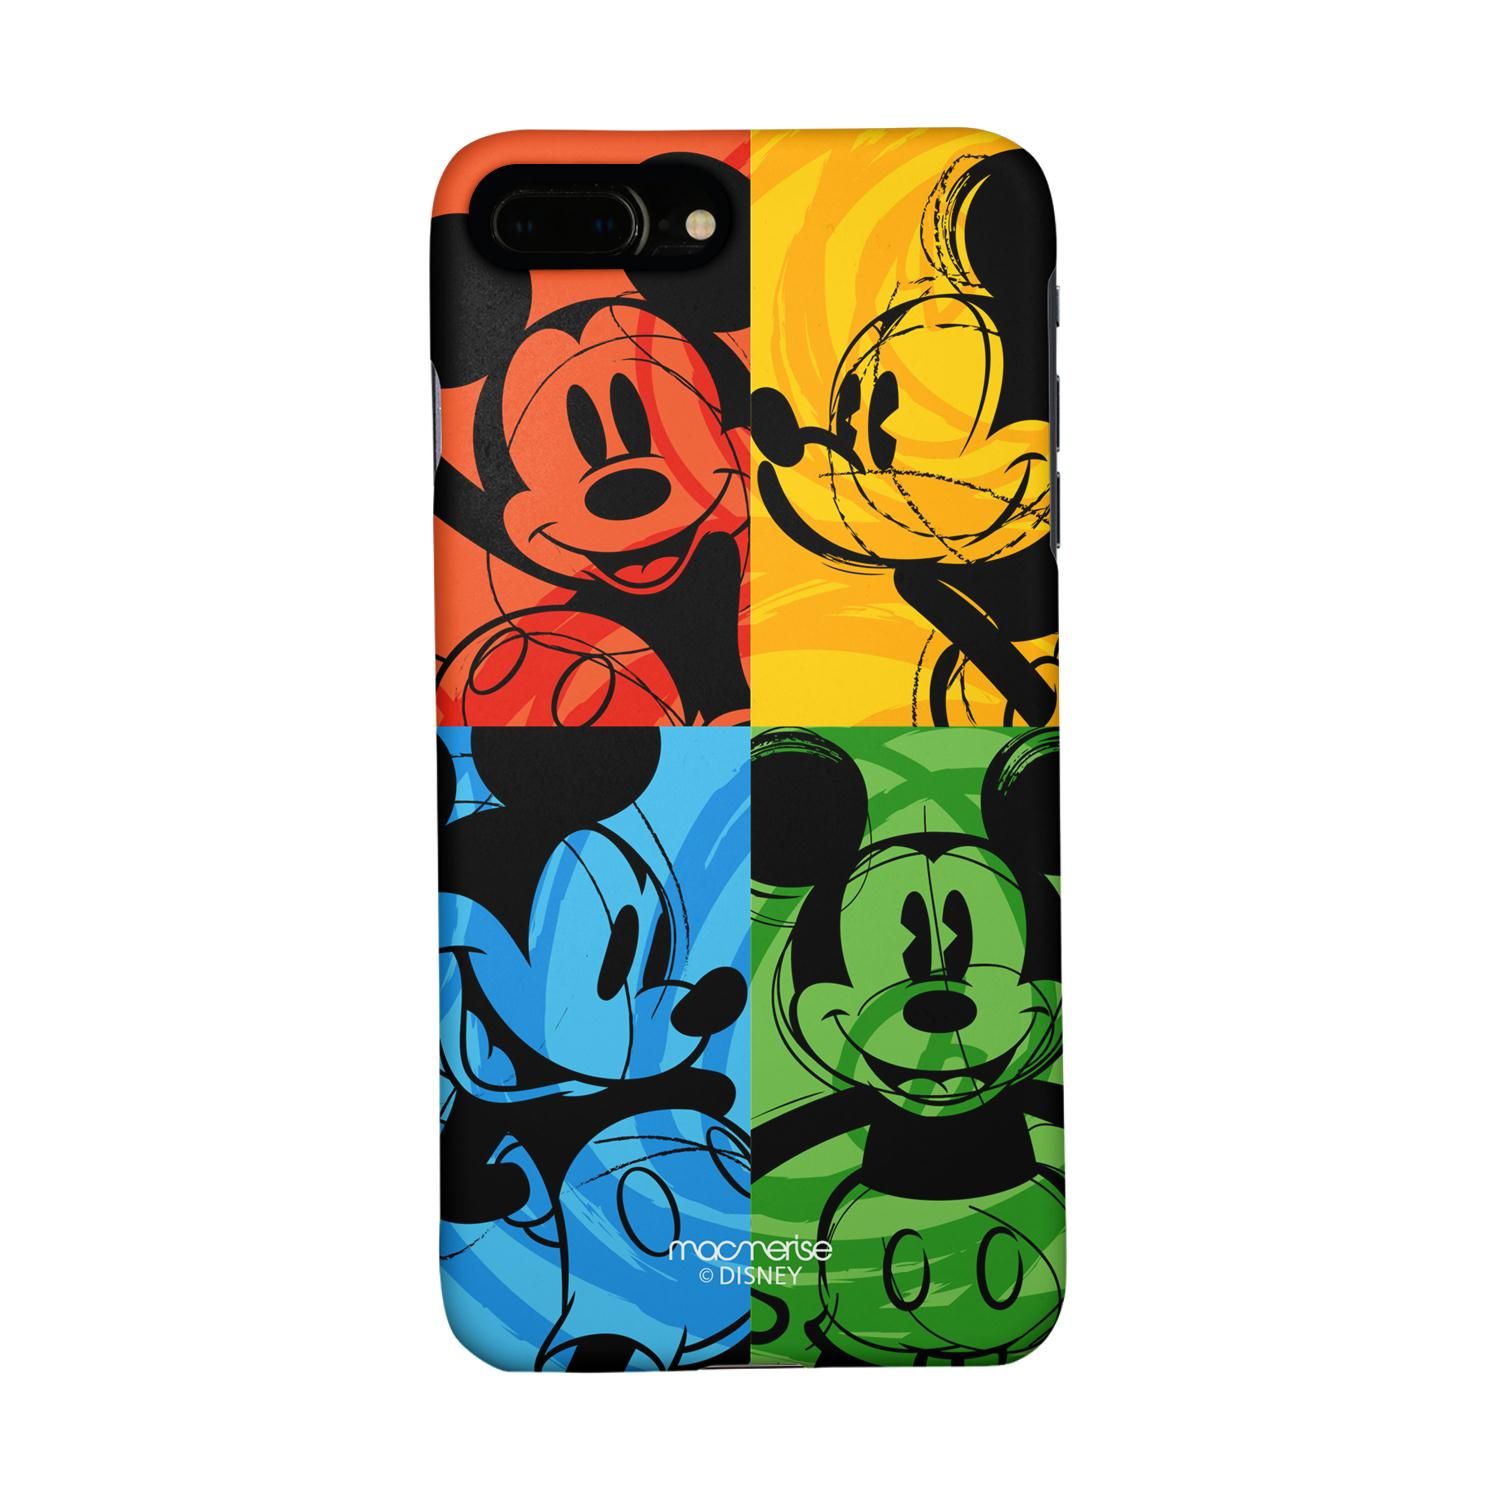 Buy Shades of Mickey - Sleek Phone Case for iPhone 7 Plus Online